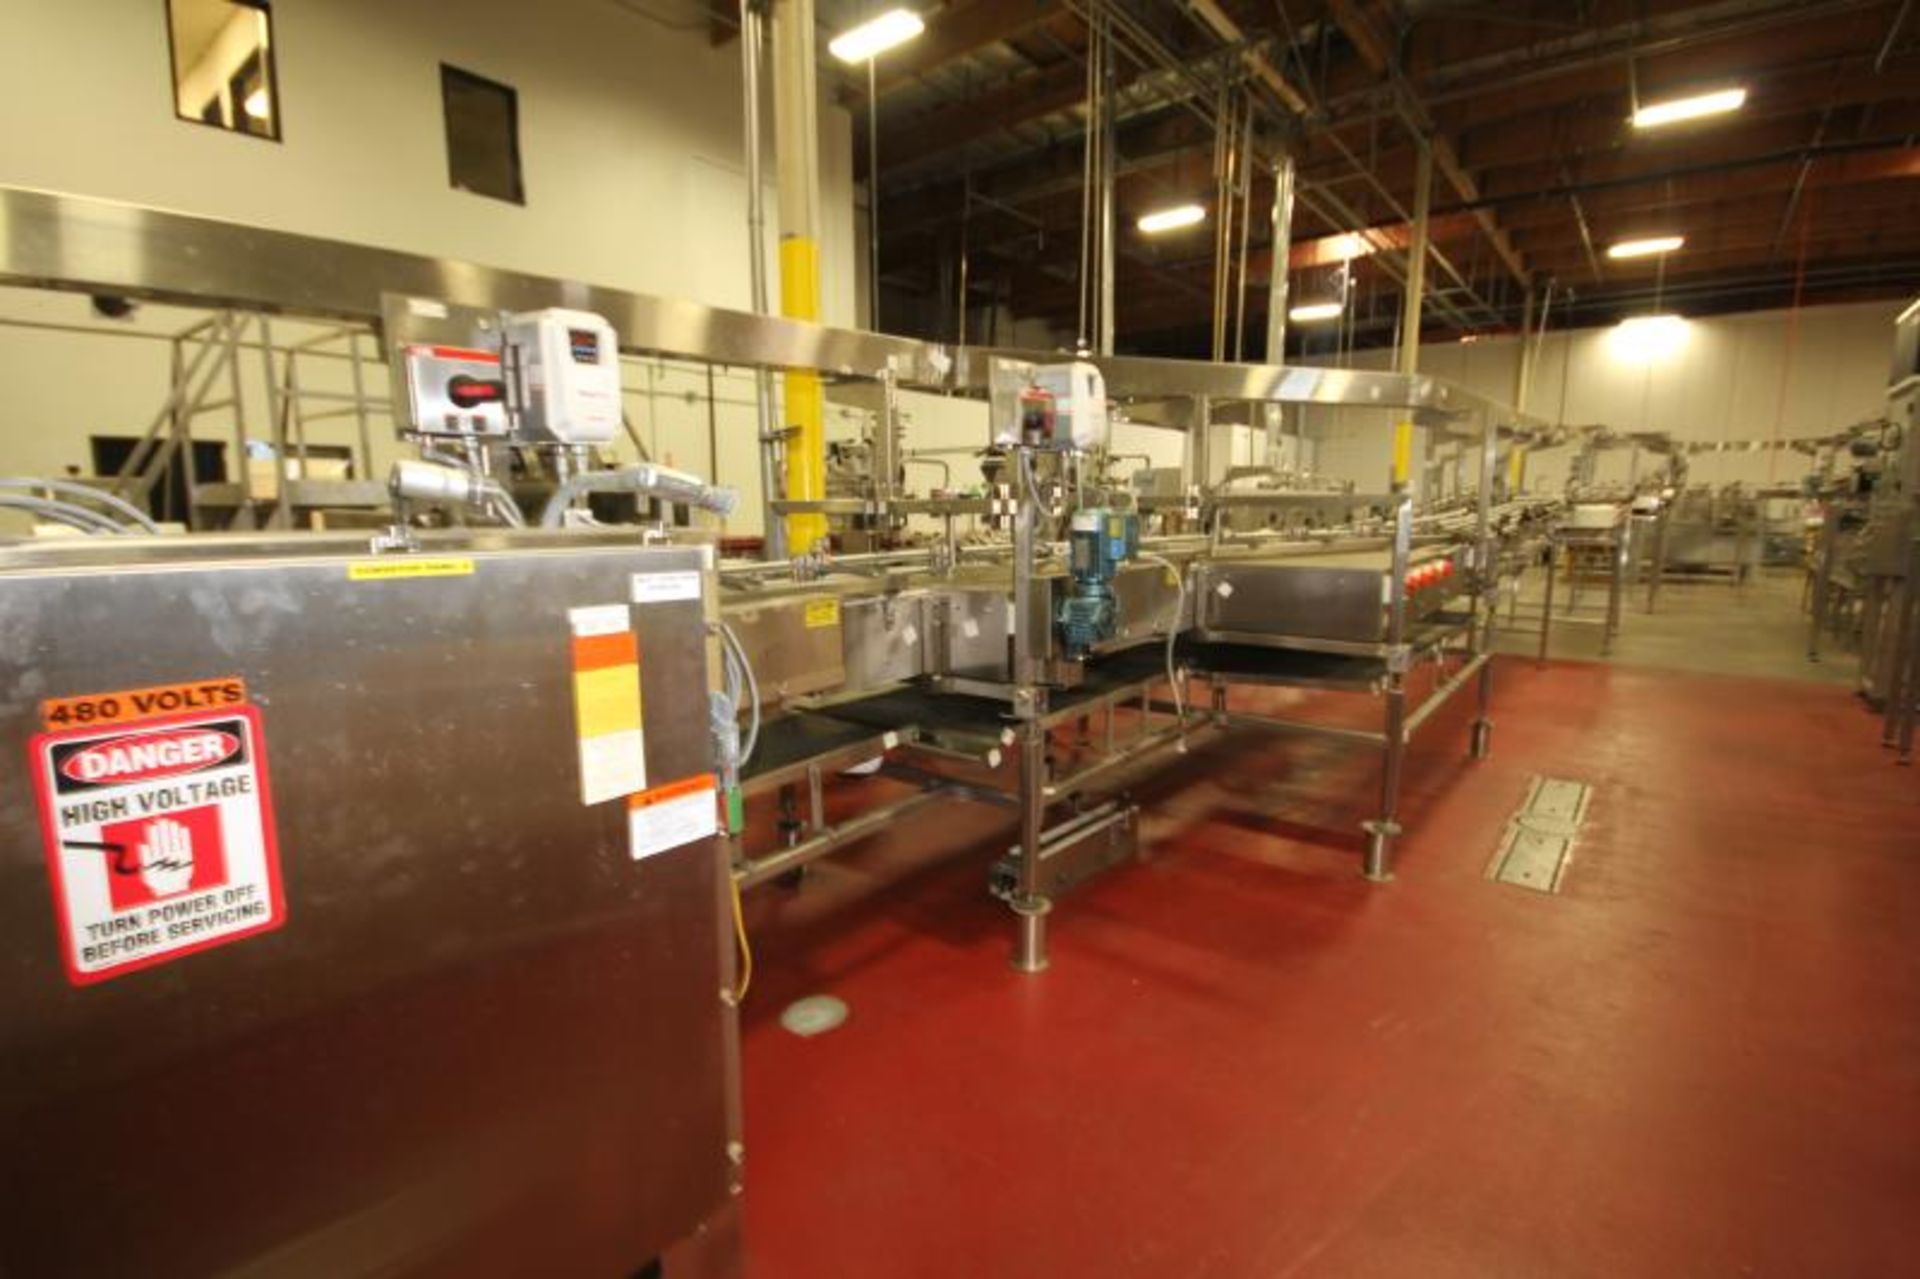 Sentry Aprox. 200' S/S Bottle and Product Conveyor System, Single Filer Section, 7-Bank Control - Image 5 of 6